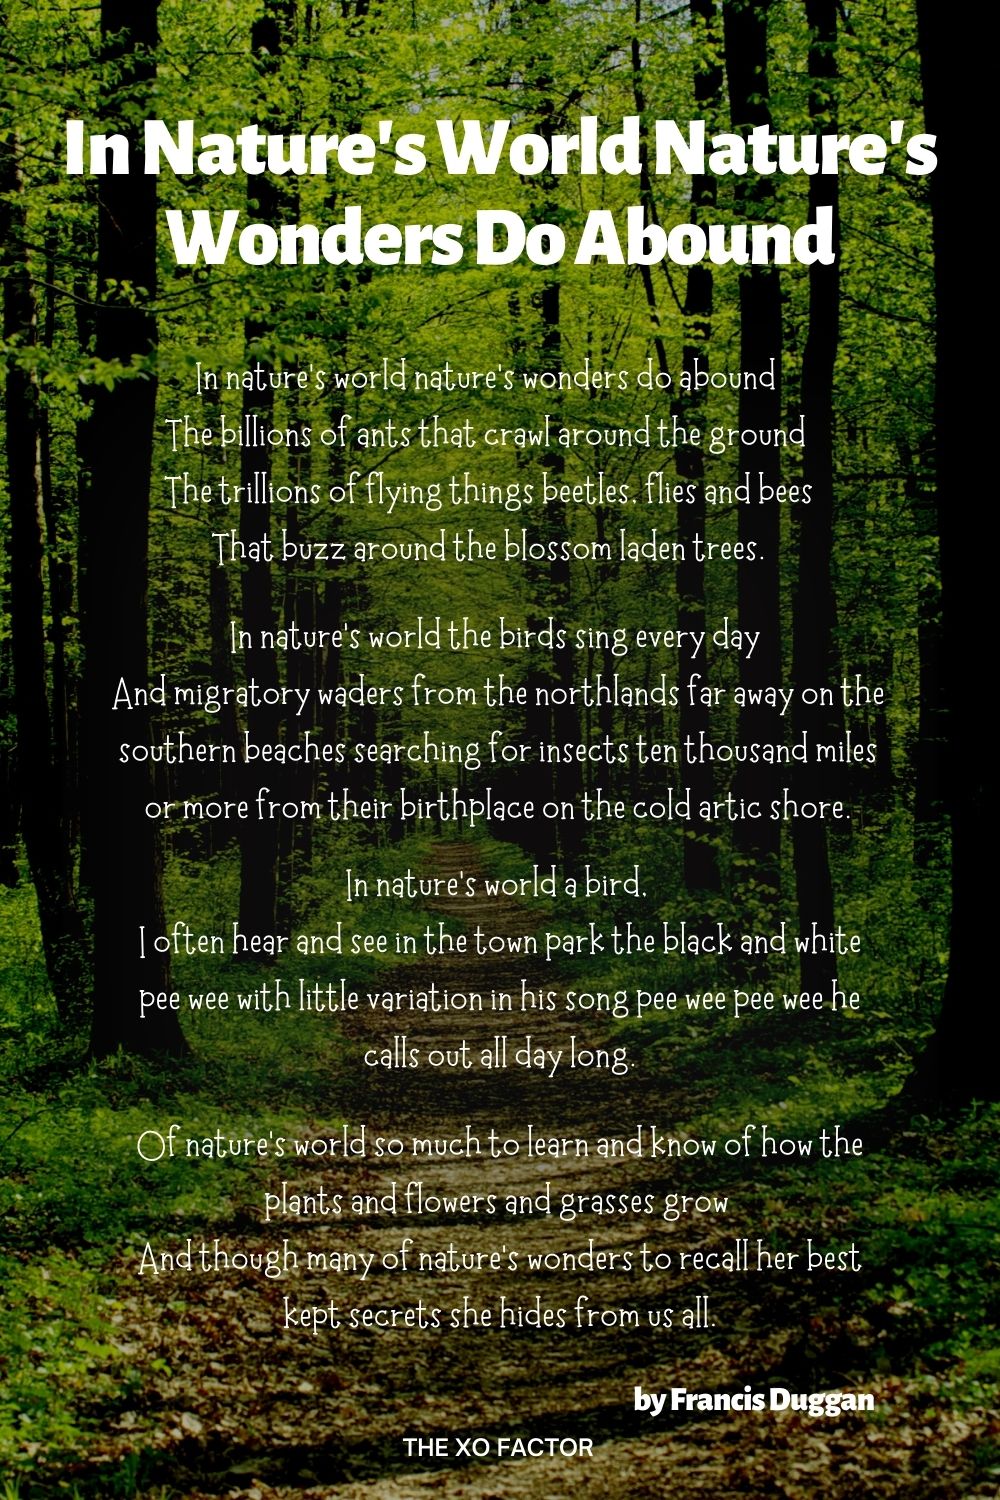 In Nature's World Nature's Wonders Do Abound Poem by Francis Duggan